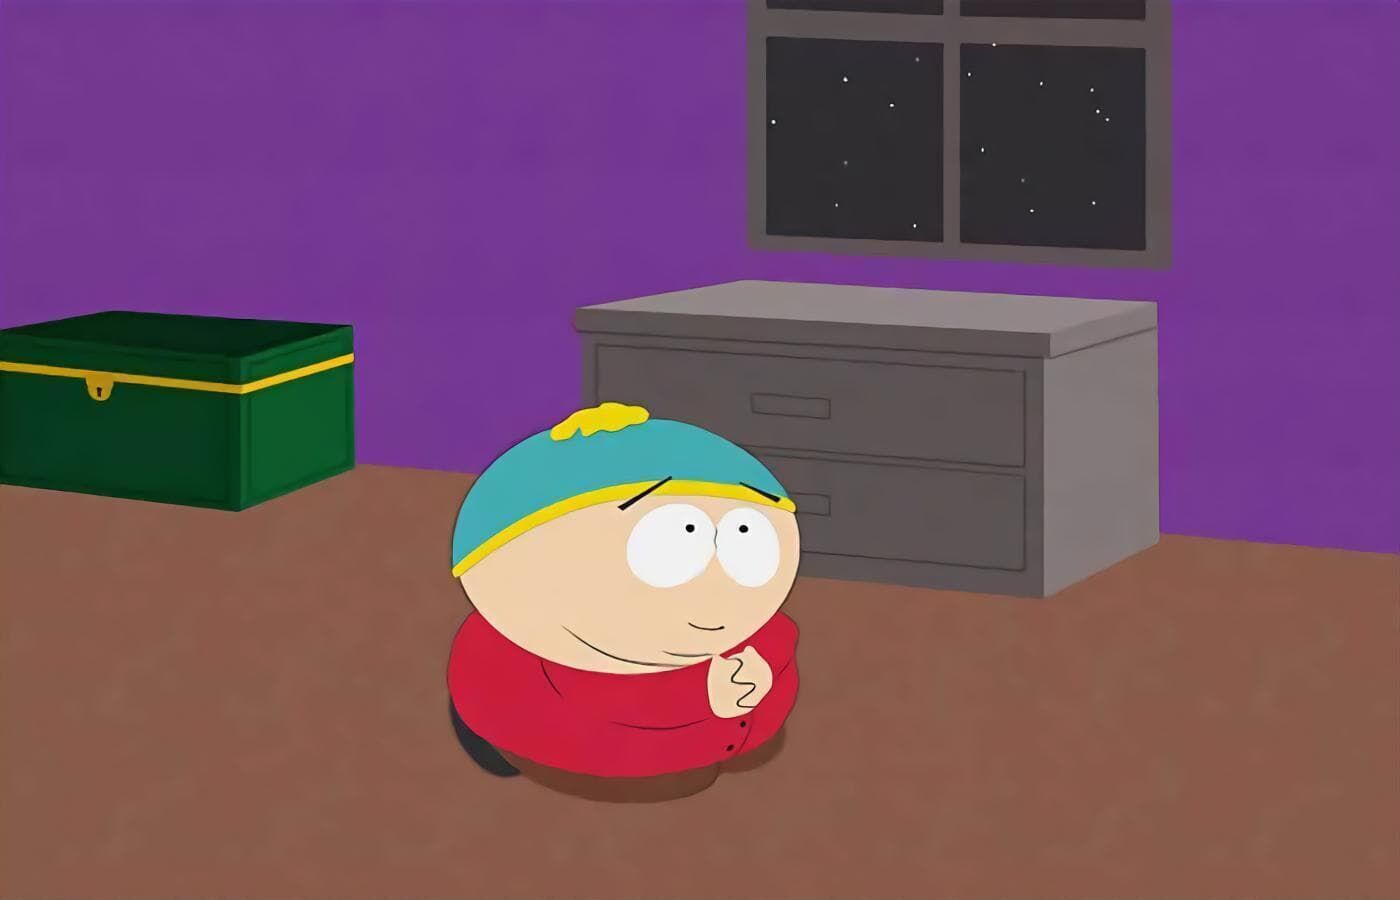 South Park - The Passion of the Jew